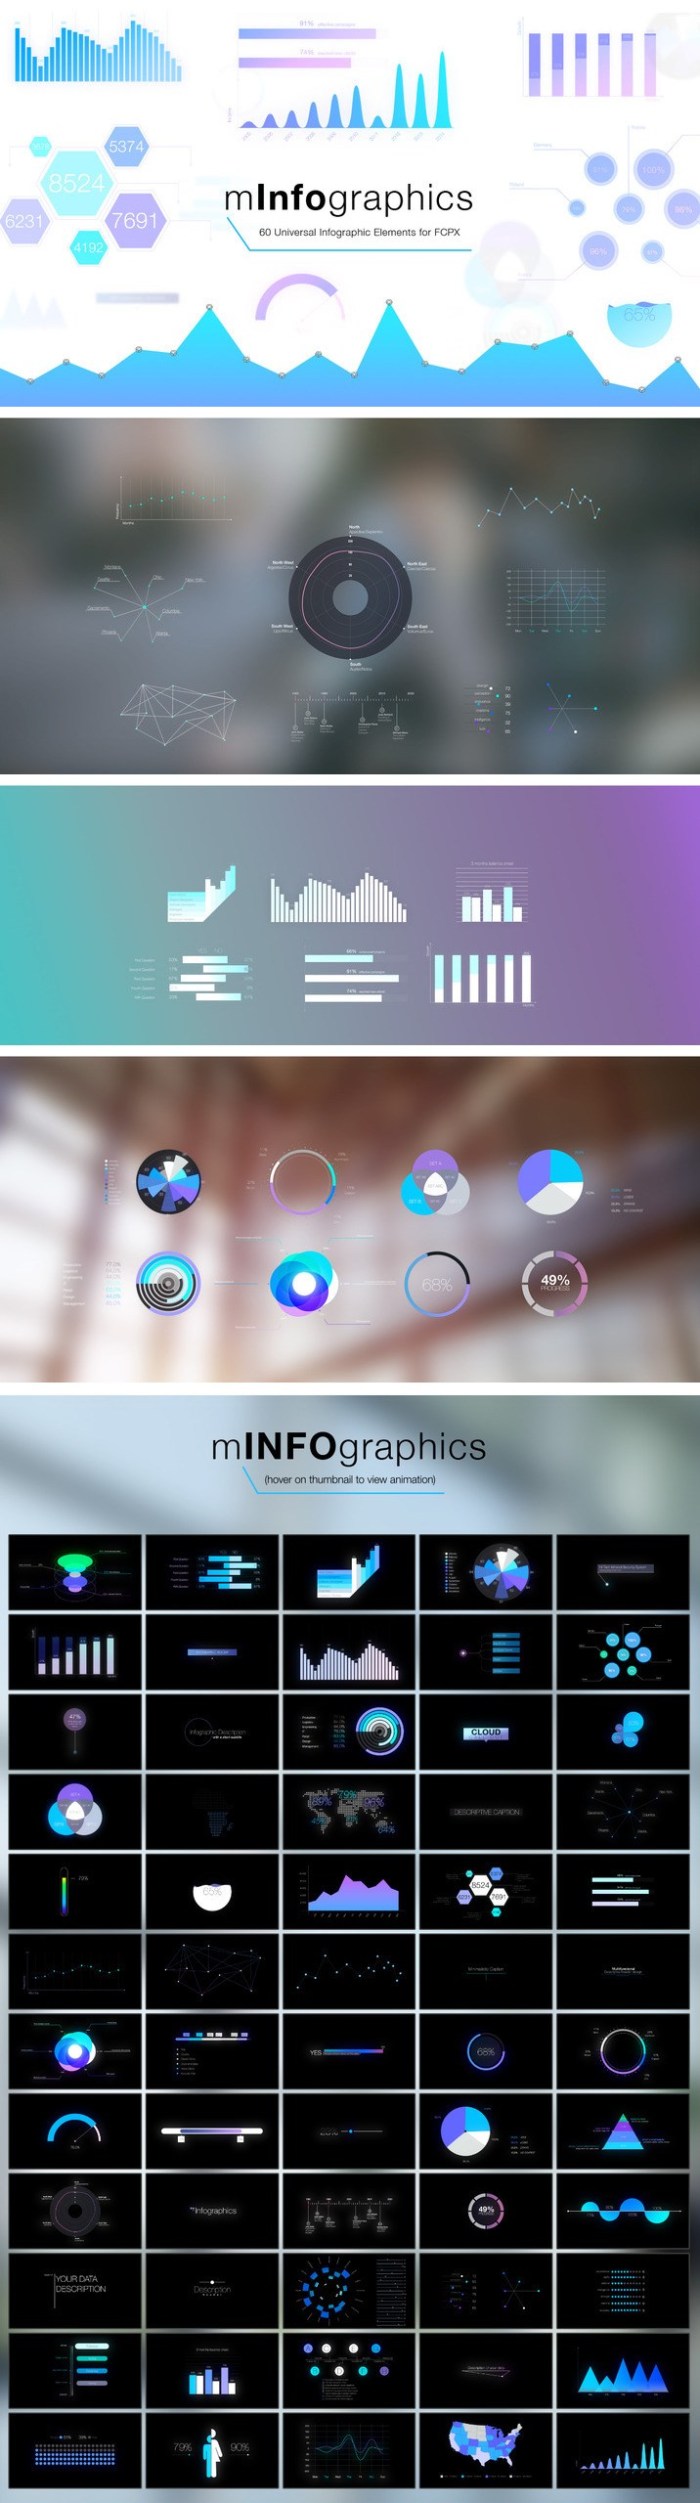 motionvfx_minfographics_charts_and_diagrams_plugin_for_final_cut_pro_x